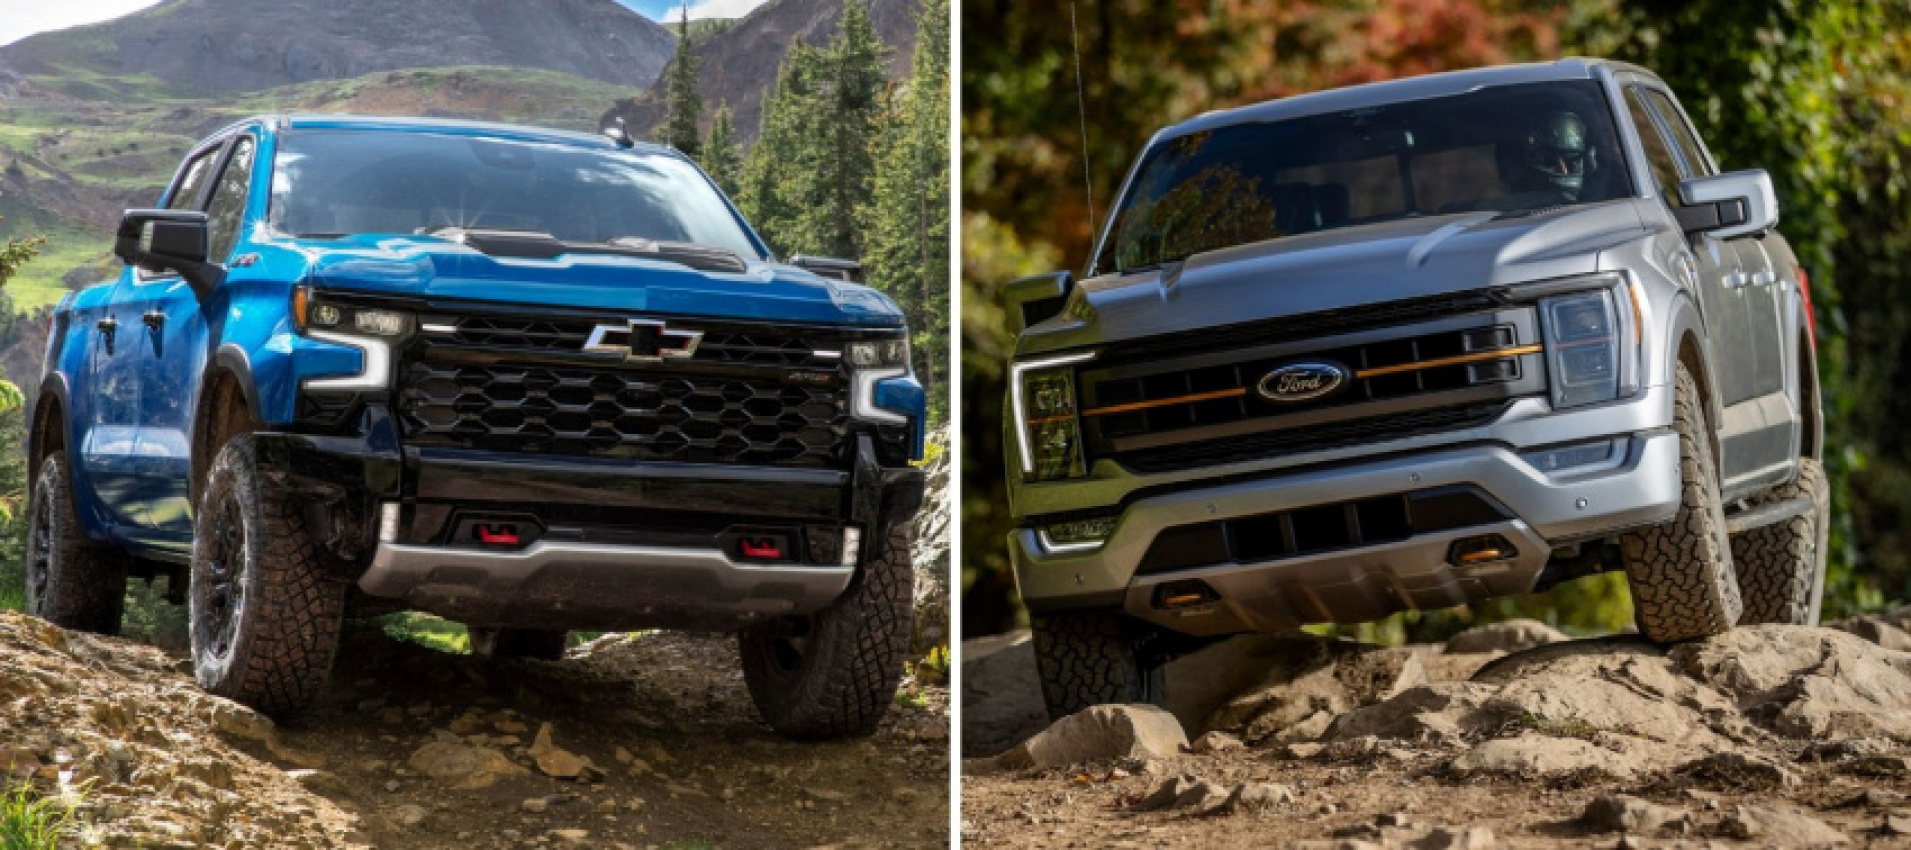 autos, cars, ford, f-150, ford f-150, off-road, silverado, 2022 chevy silverado zr2 vs. 2022 ford f-150 tremor: which rock crawling off-road pickup truck beast is the best?